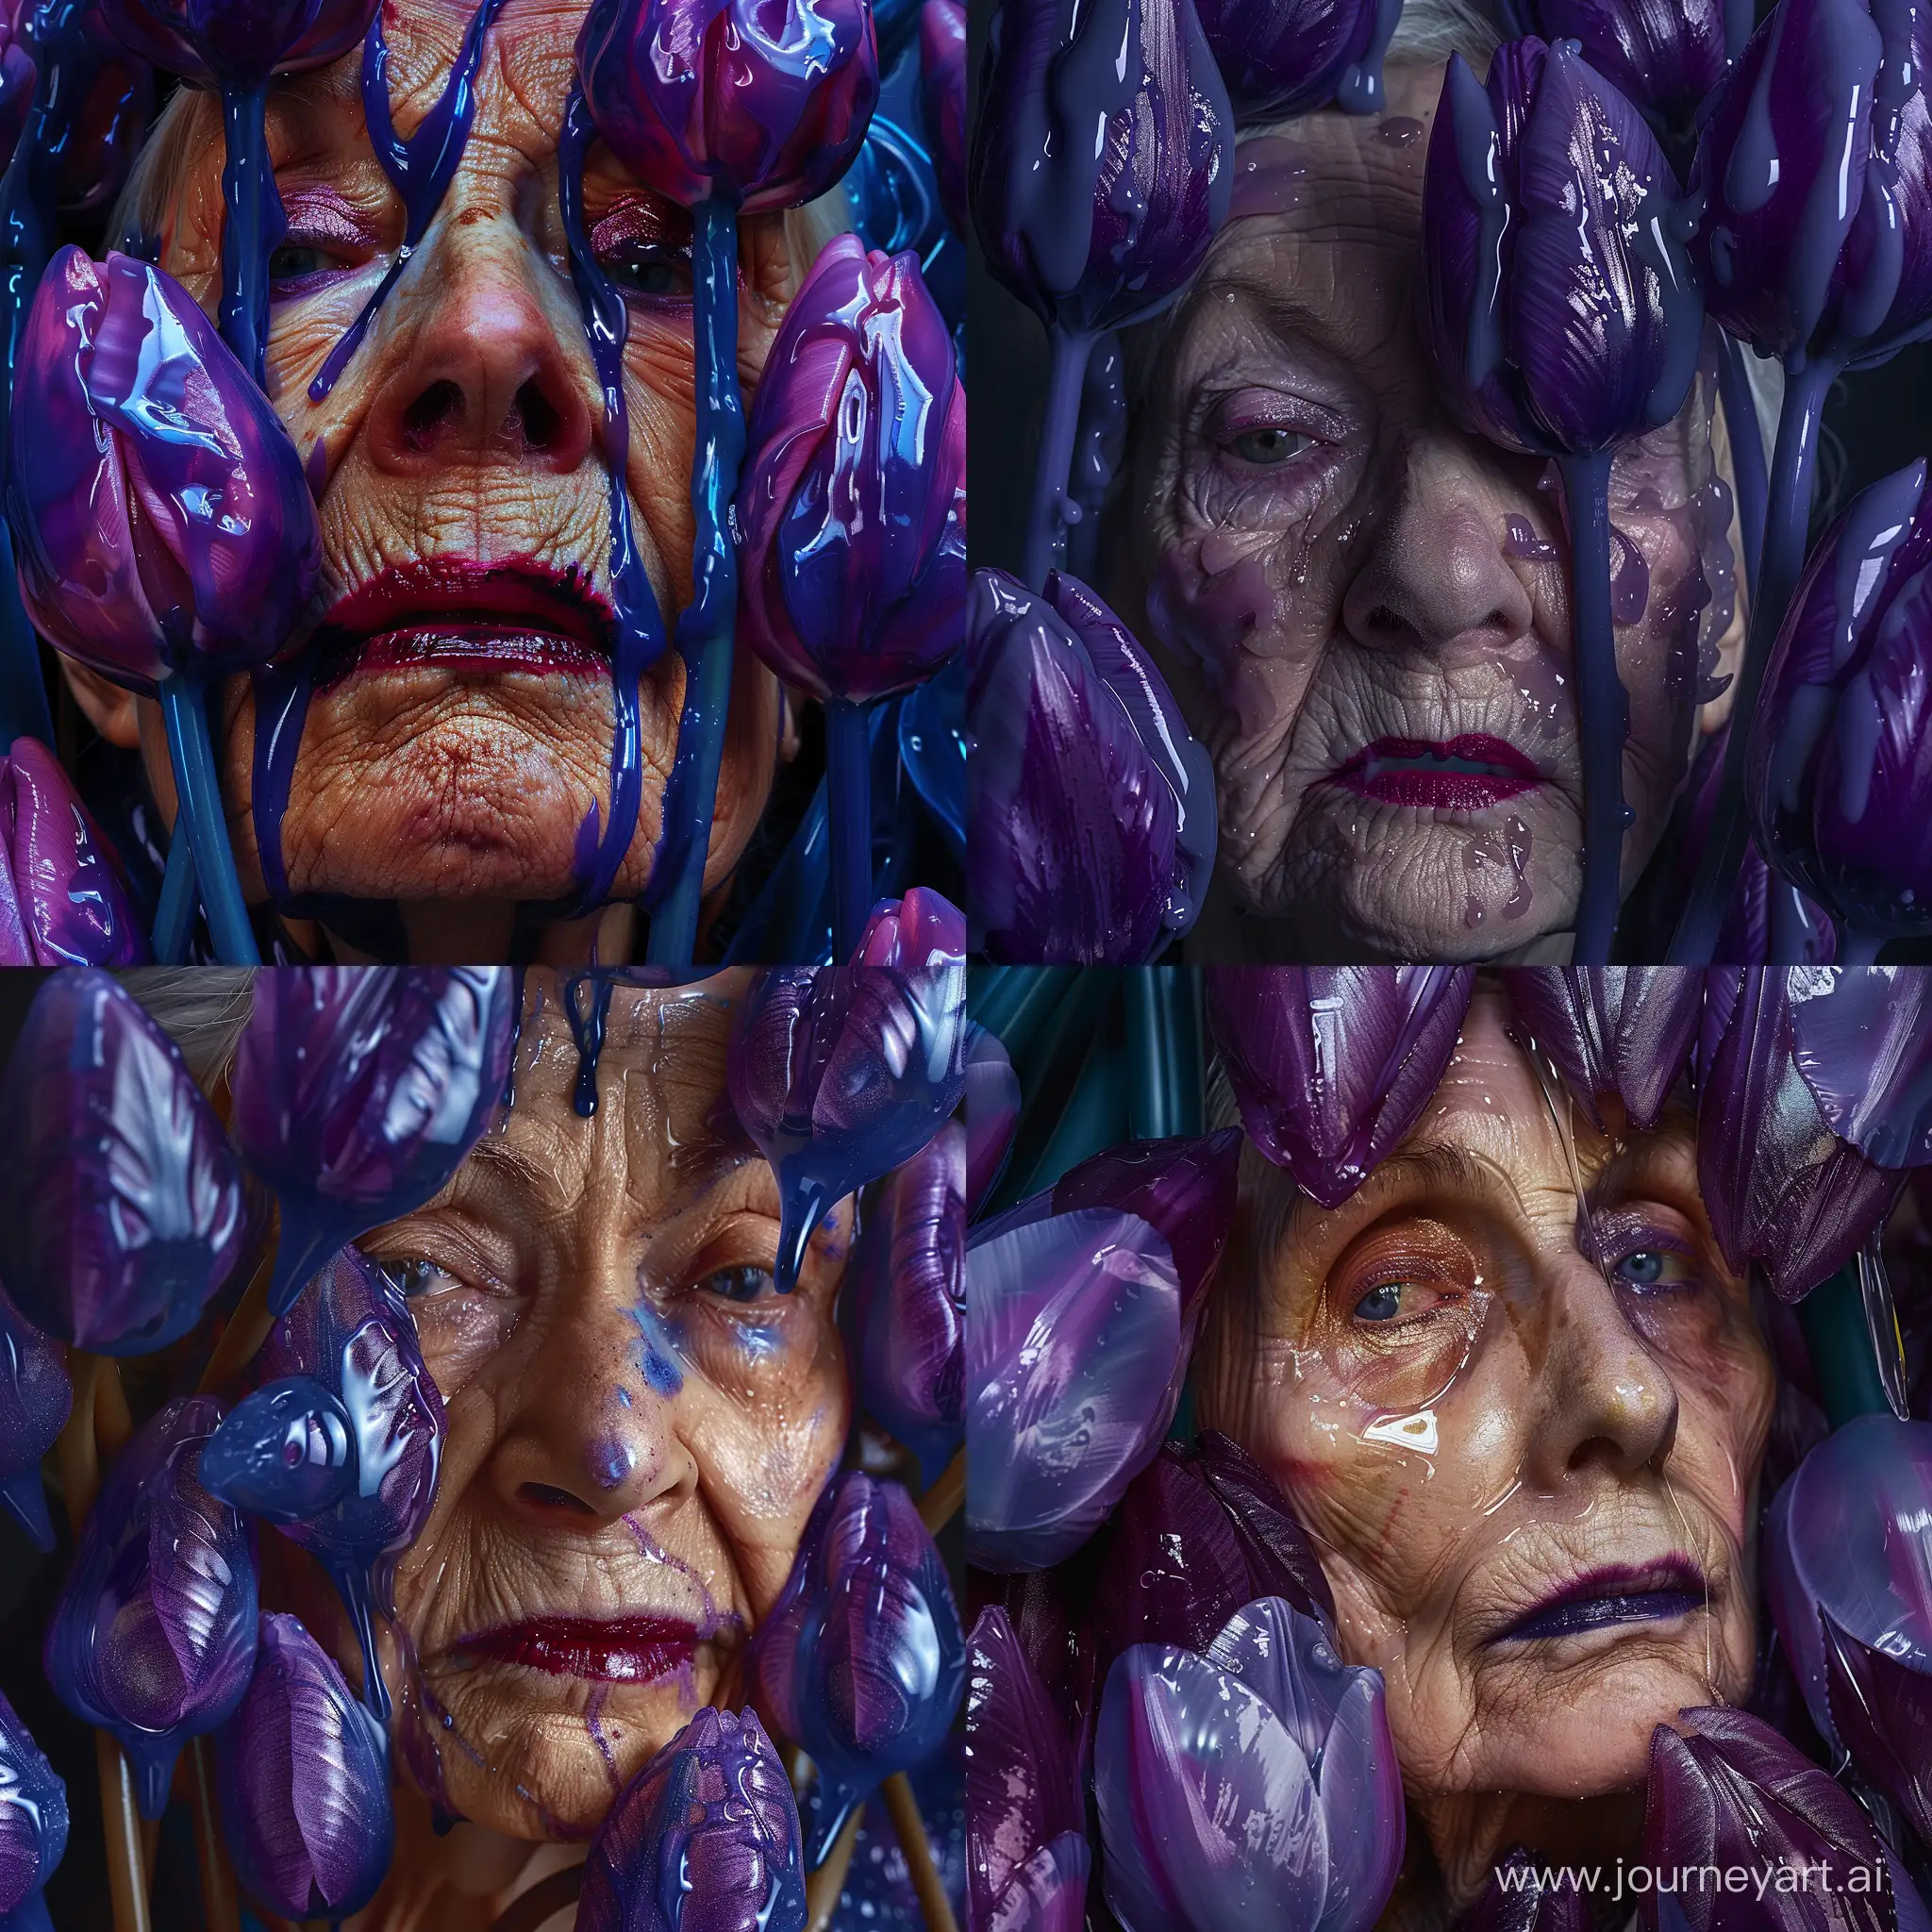 Elderly-Woman-with-GrungeStyle-Makeup-Surrounded-by-PurpleBlue-Slime-Tulips